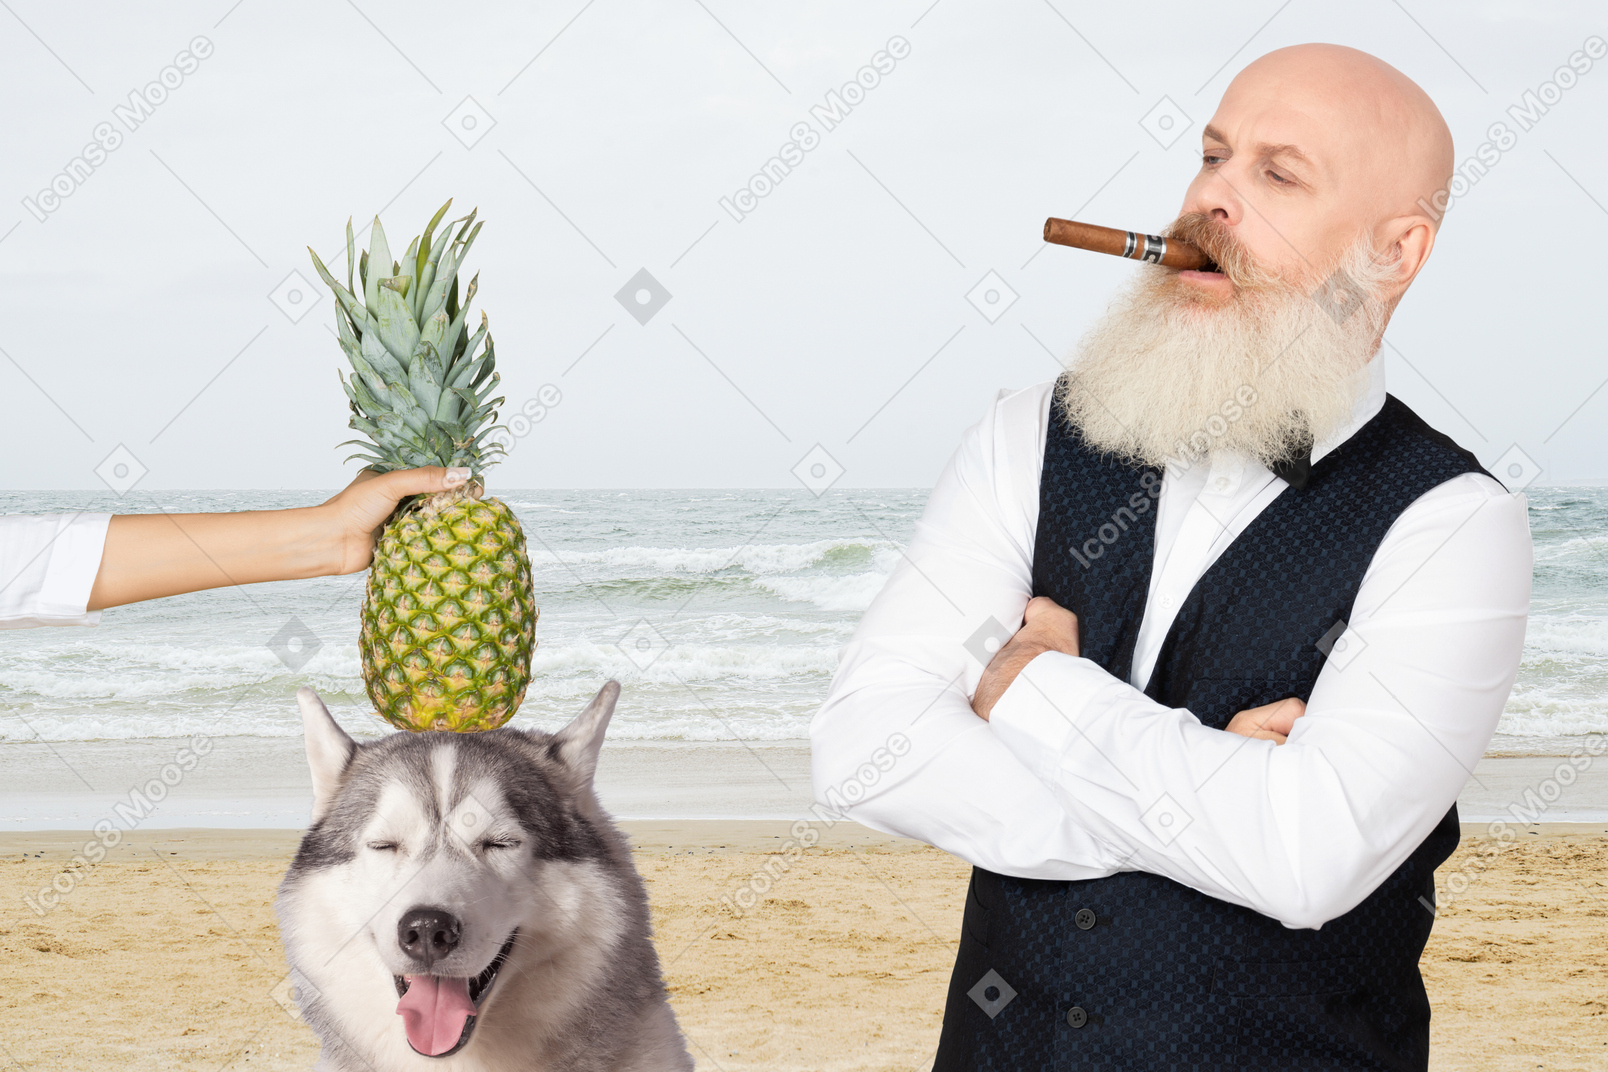 Bearded bald old man with a cigar in his mouth standing on a seashore  is watching a malamute and a pineapple put to dog`s head by somebody`s hand